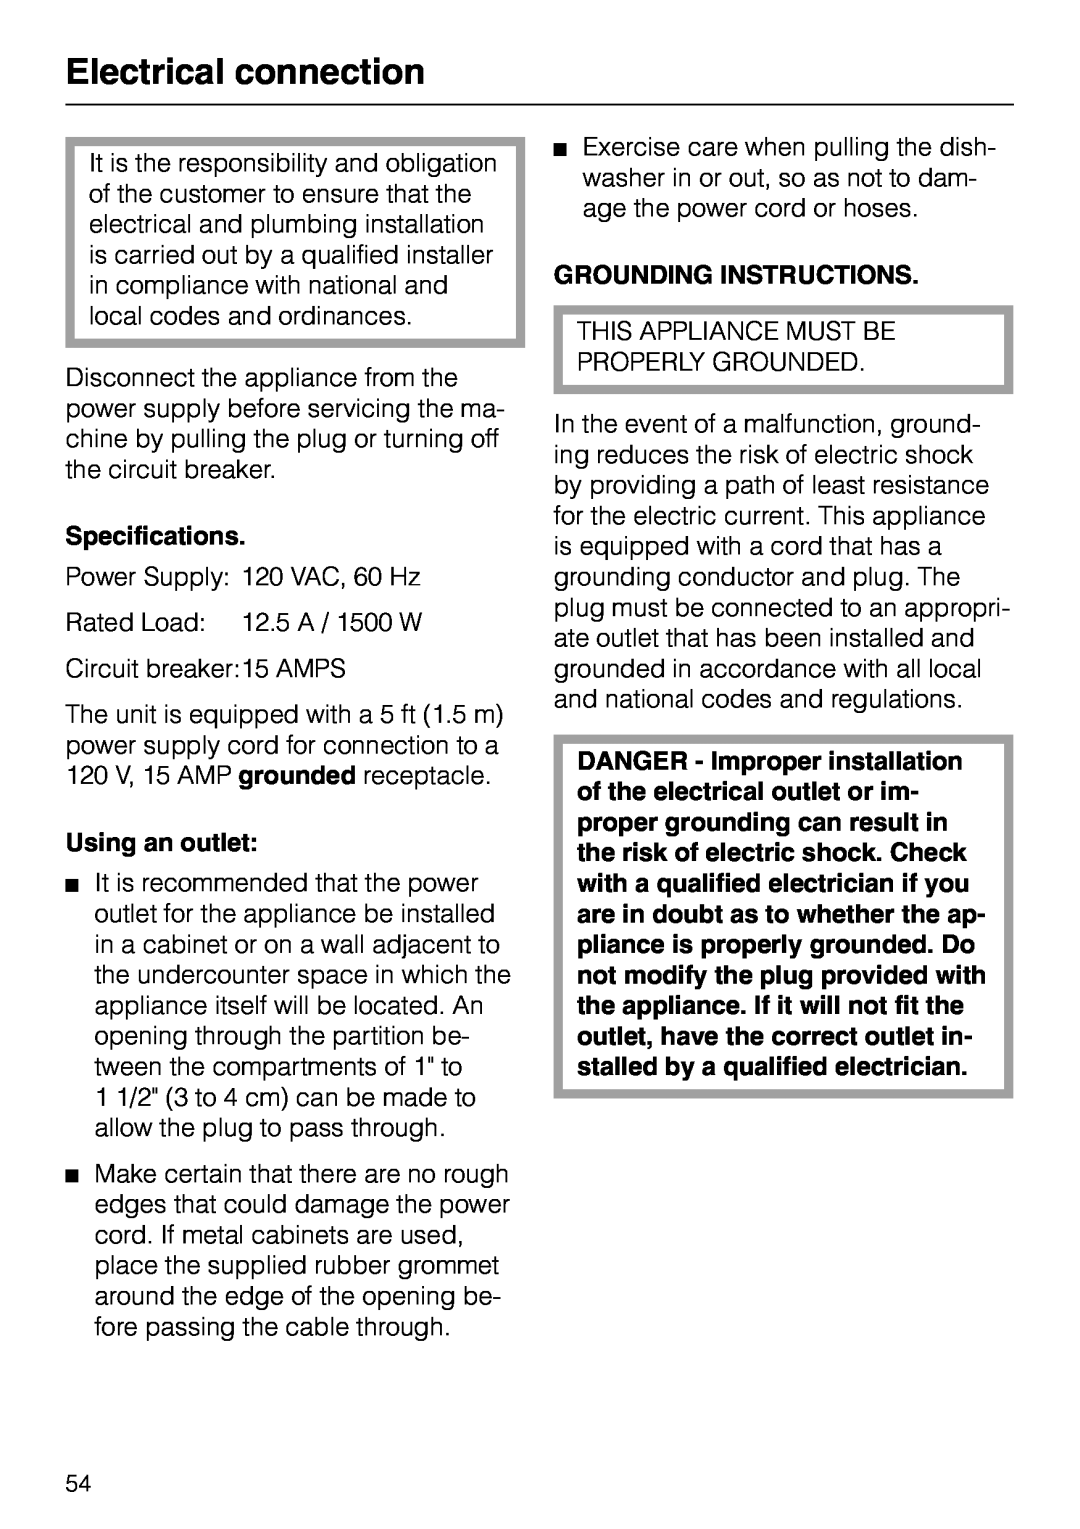 Miele M.-NR. 04 390 922 Electrical connection, Specifications, Using an outlet, Grounding Instructions 